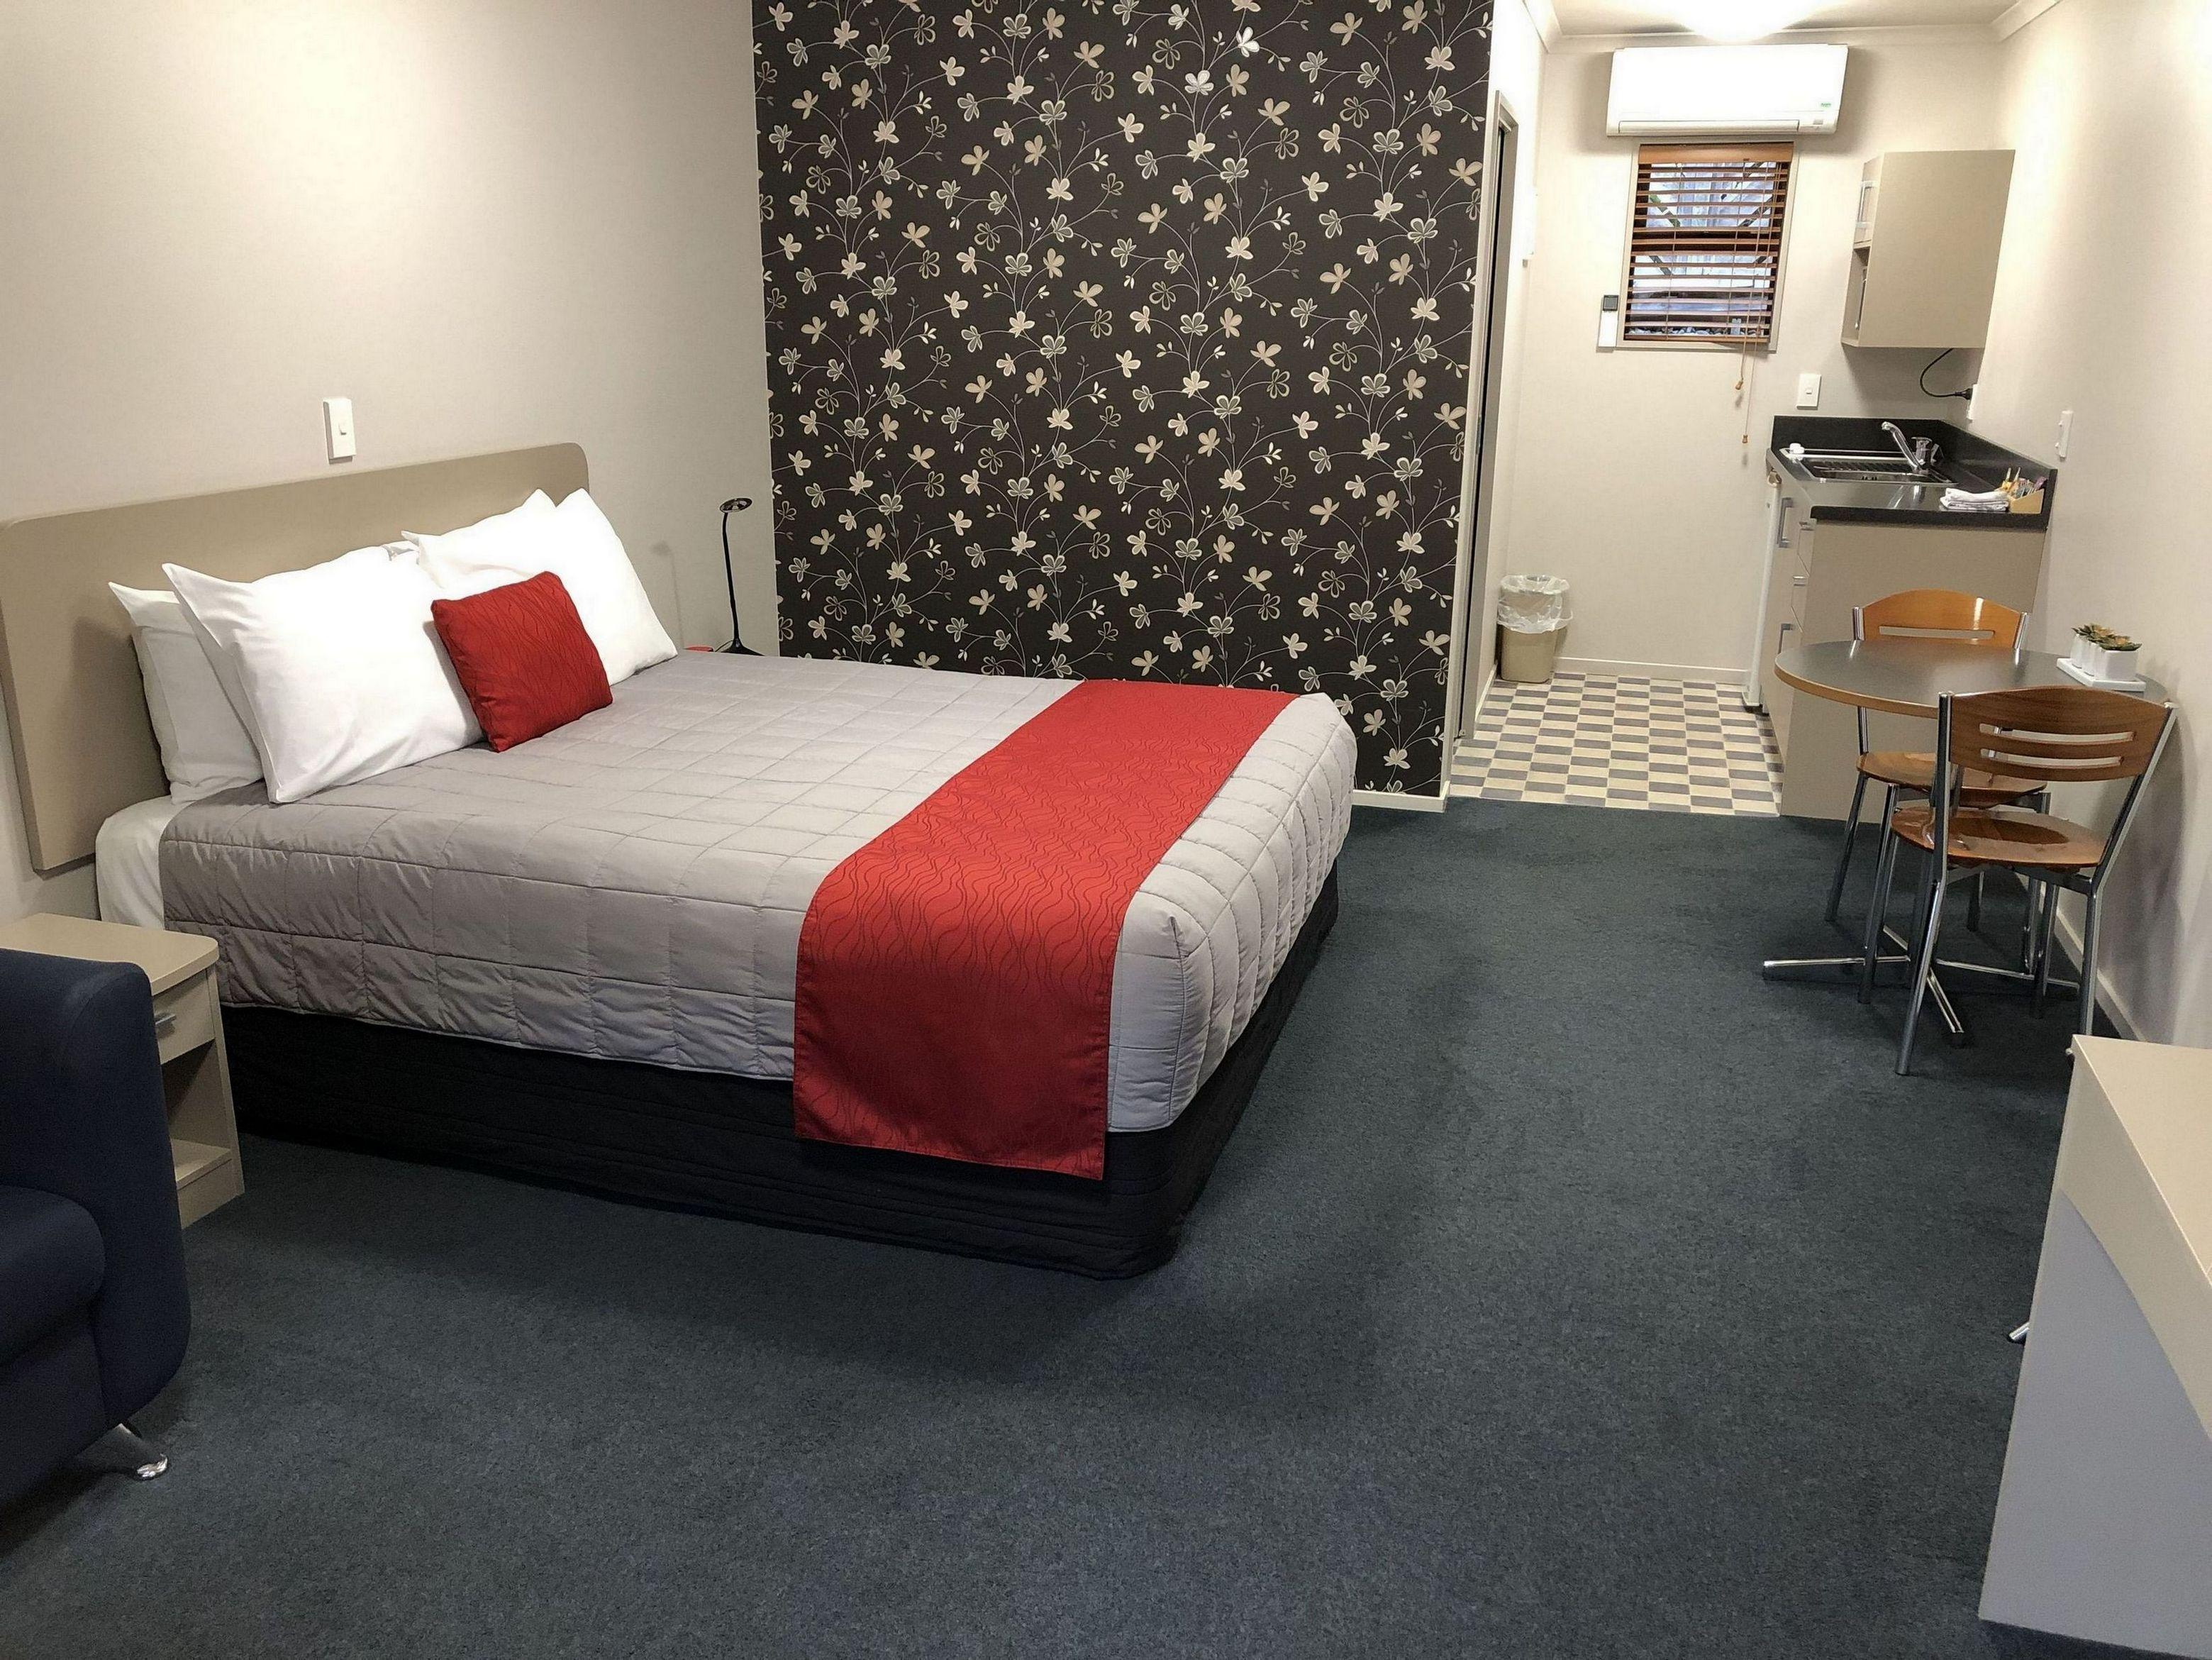 Superior Spa suite, King bed. Double glazed with Air con and heat pump for guest comfort. Electric blankets, fully self-contained kitchen, large ensuite bathroom with spa bath, hairdryer, LCD TV with Sky. Work station with wireless broadband.